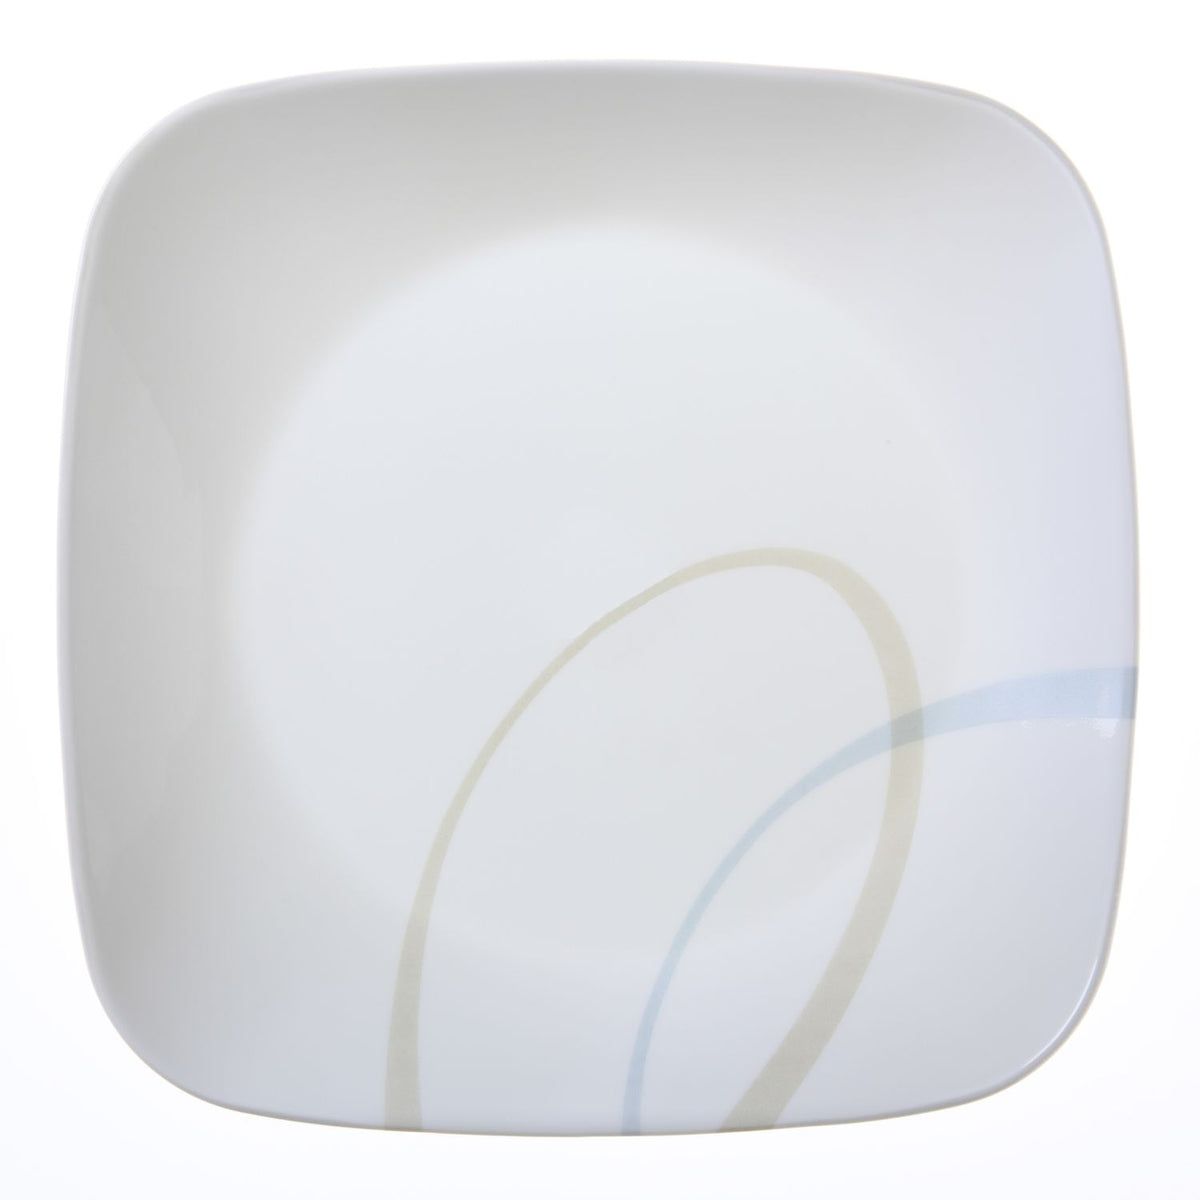 buy dinnerware sets at cheap rate in bulk. wholesale & retail kitchenware supplies store.